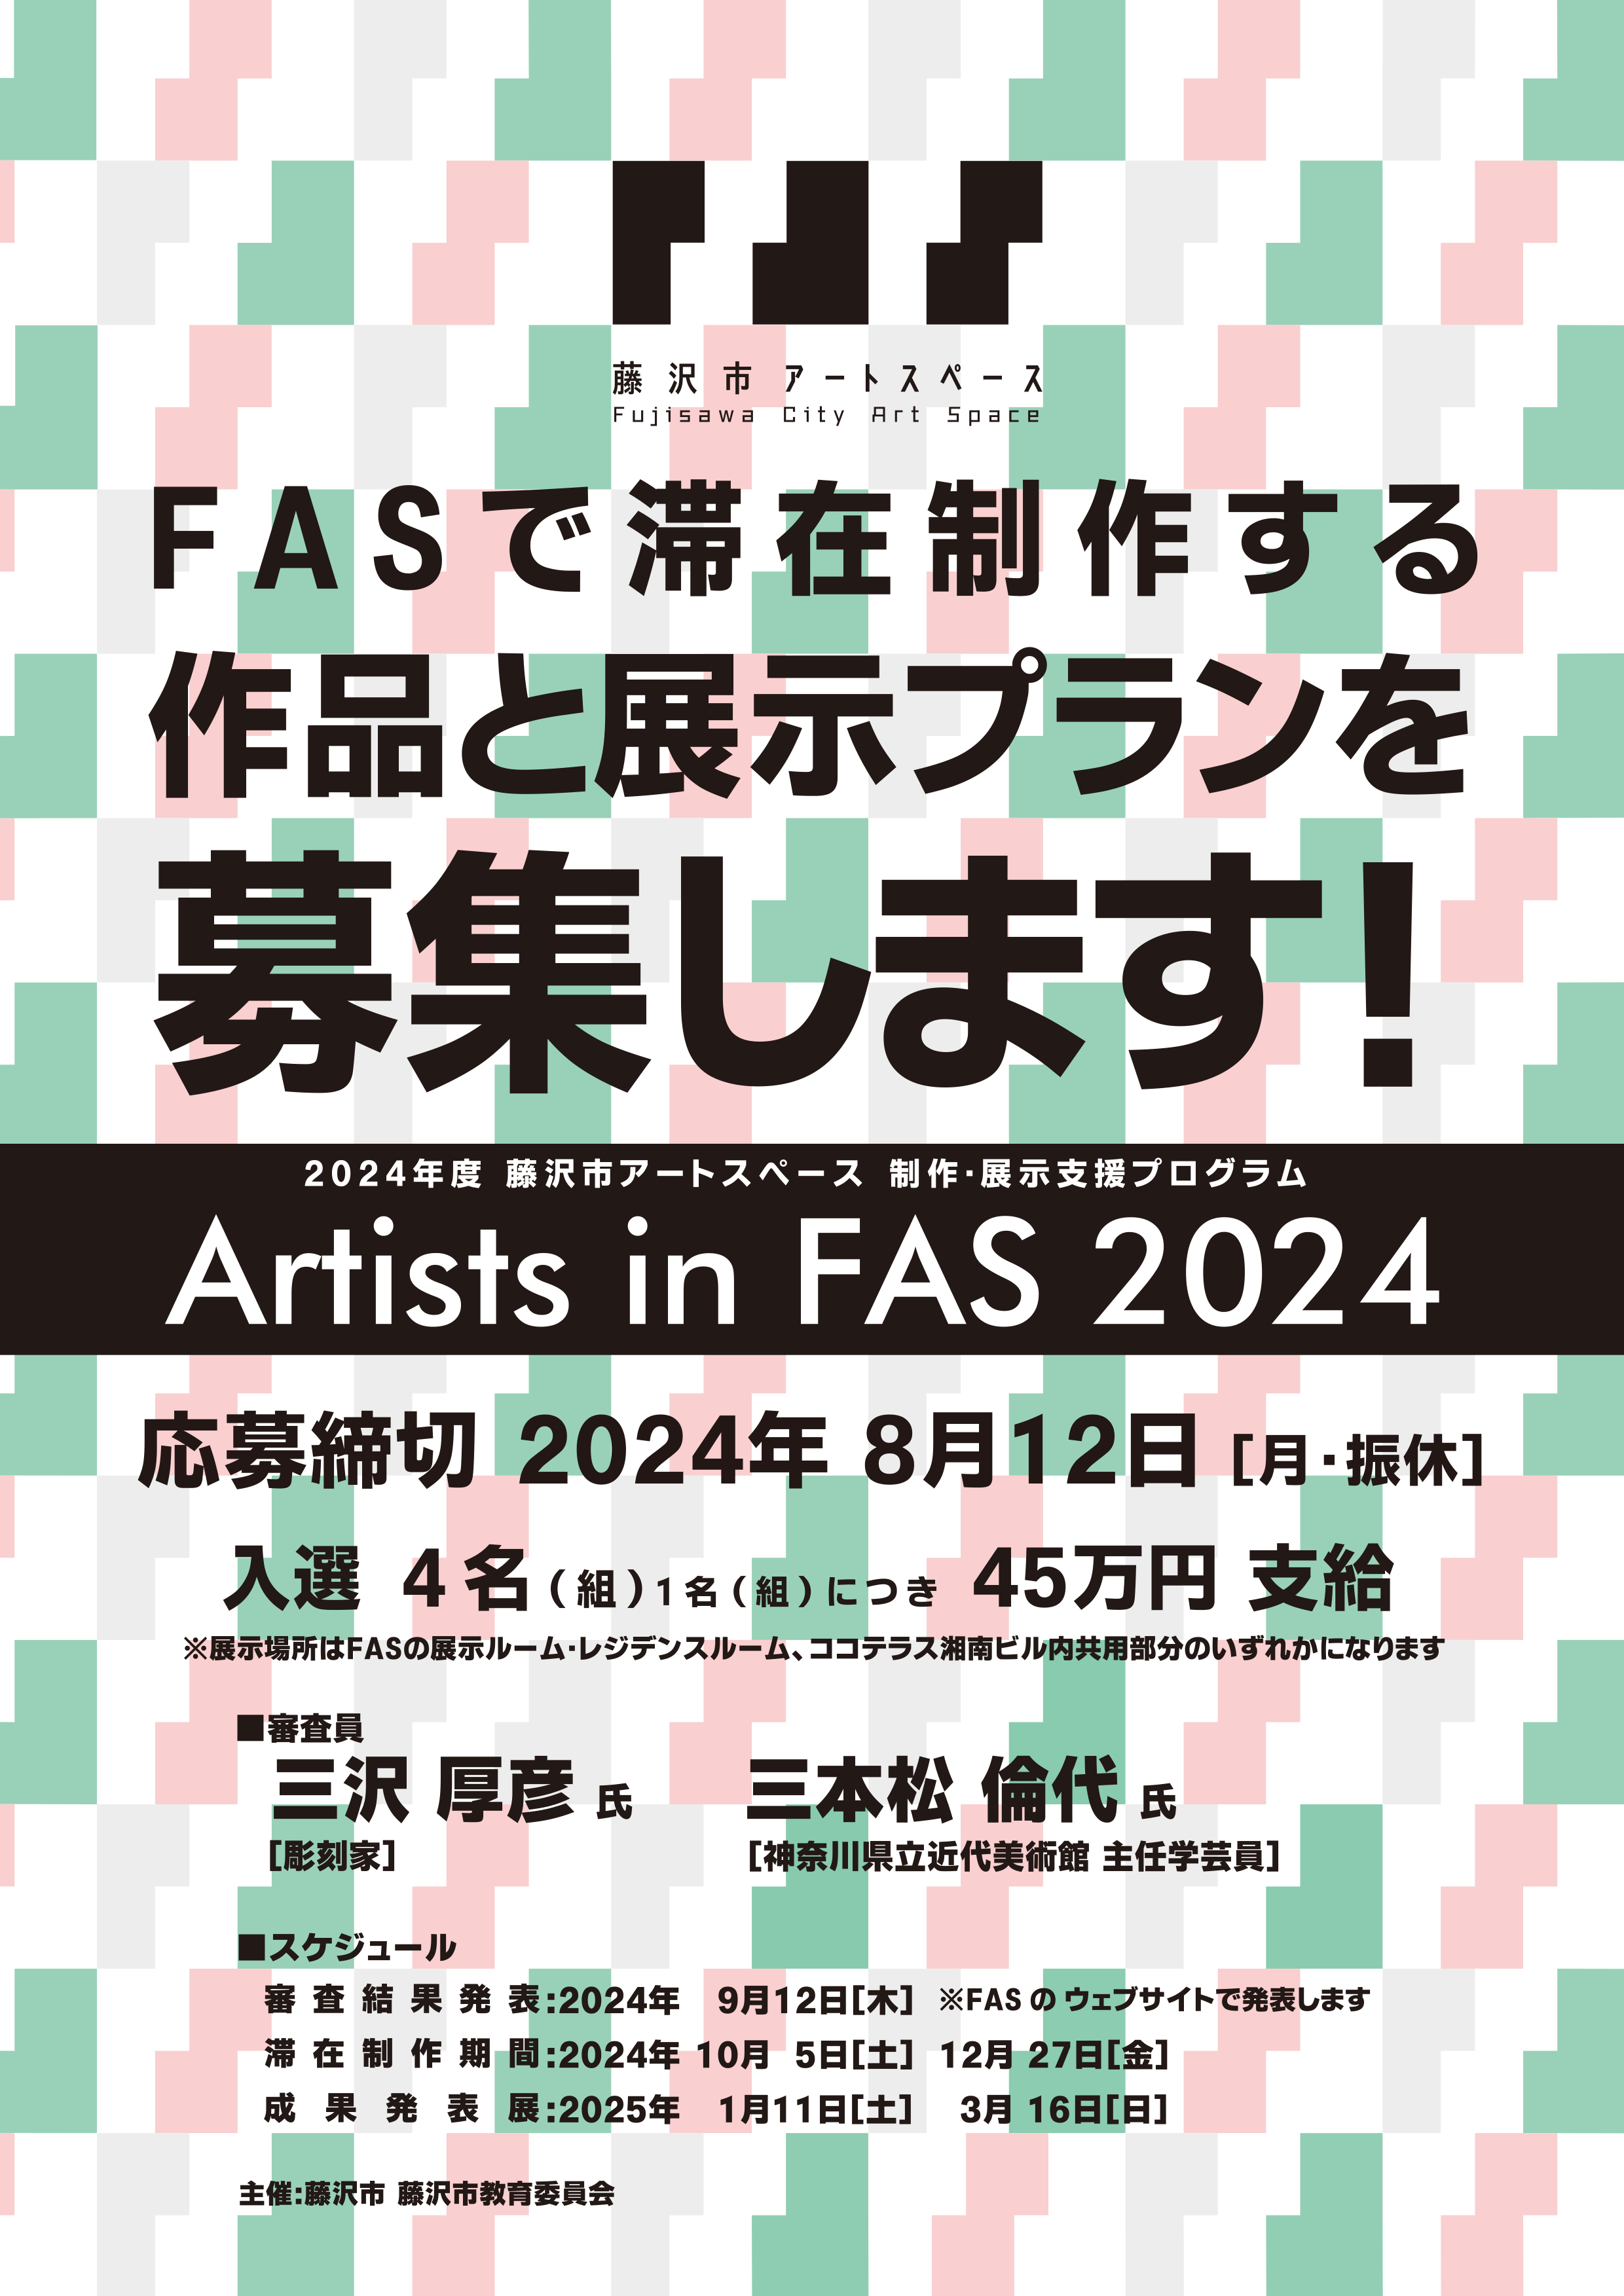 Artists in FAS 2024イメージ